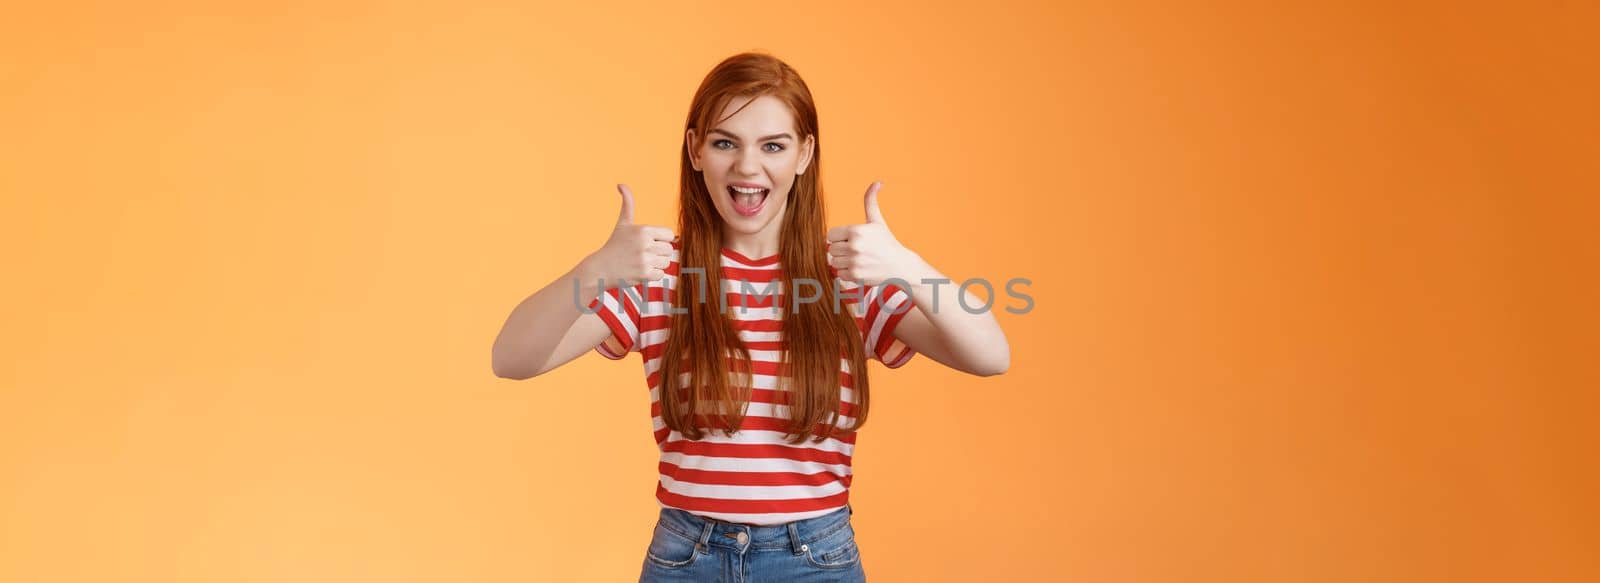 Sassy rebellious wild redhead cool girl having fun adore awesome party, show satisfactory gesture, thumb-up smiling say yeah joyfully, enjoy cool event, having fun, like idea, orange background.